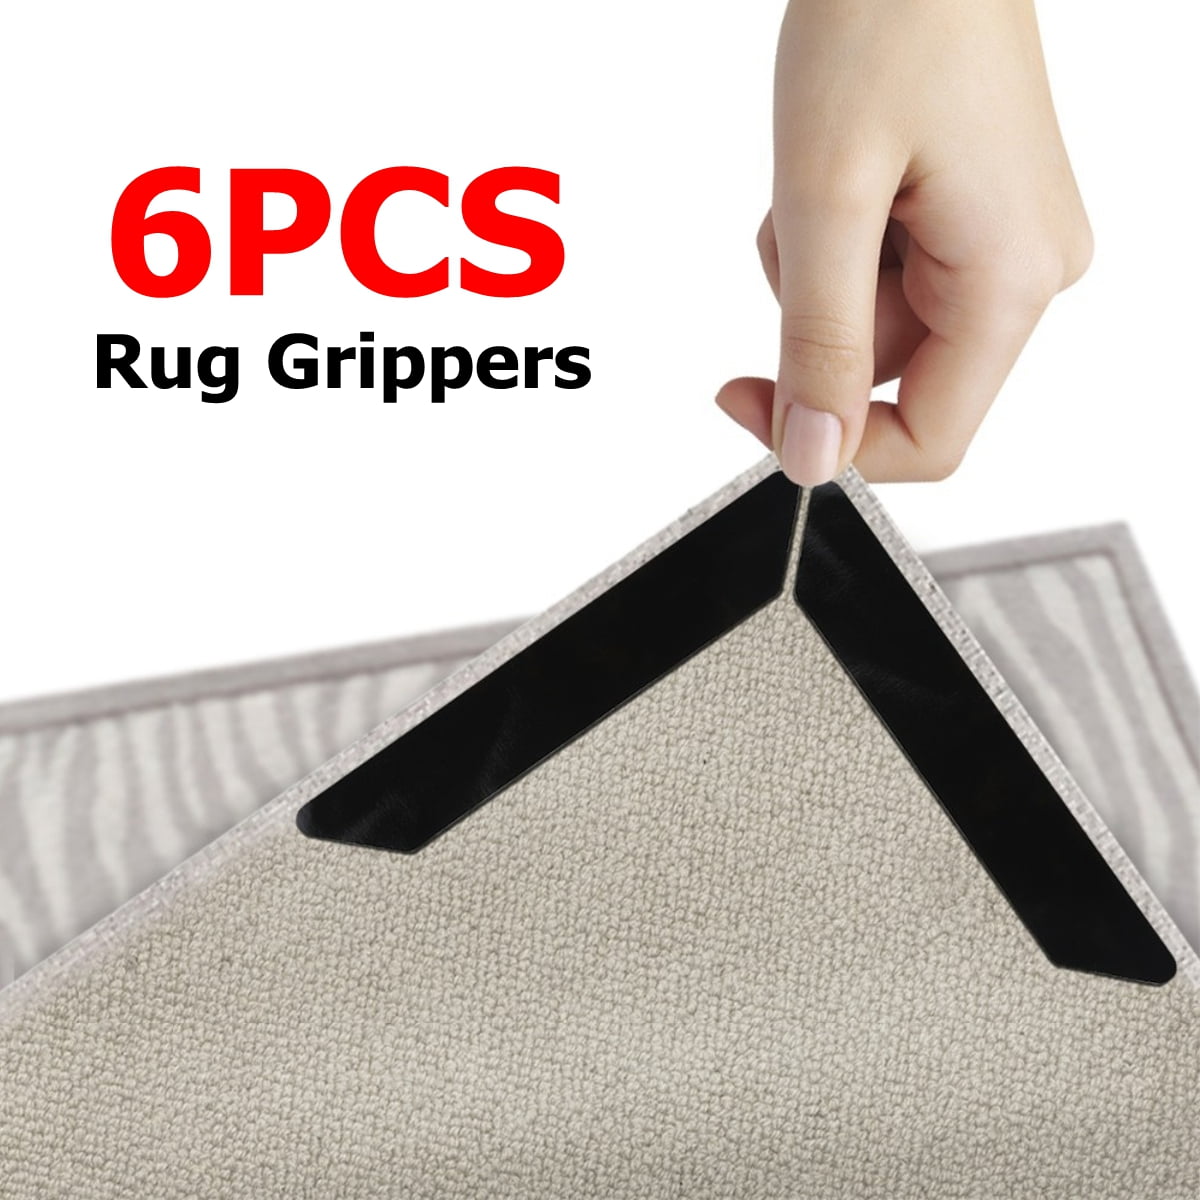 Rug Grippers Pad 6pcs Renewable, Rug Gripper Tape For Carpet